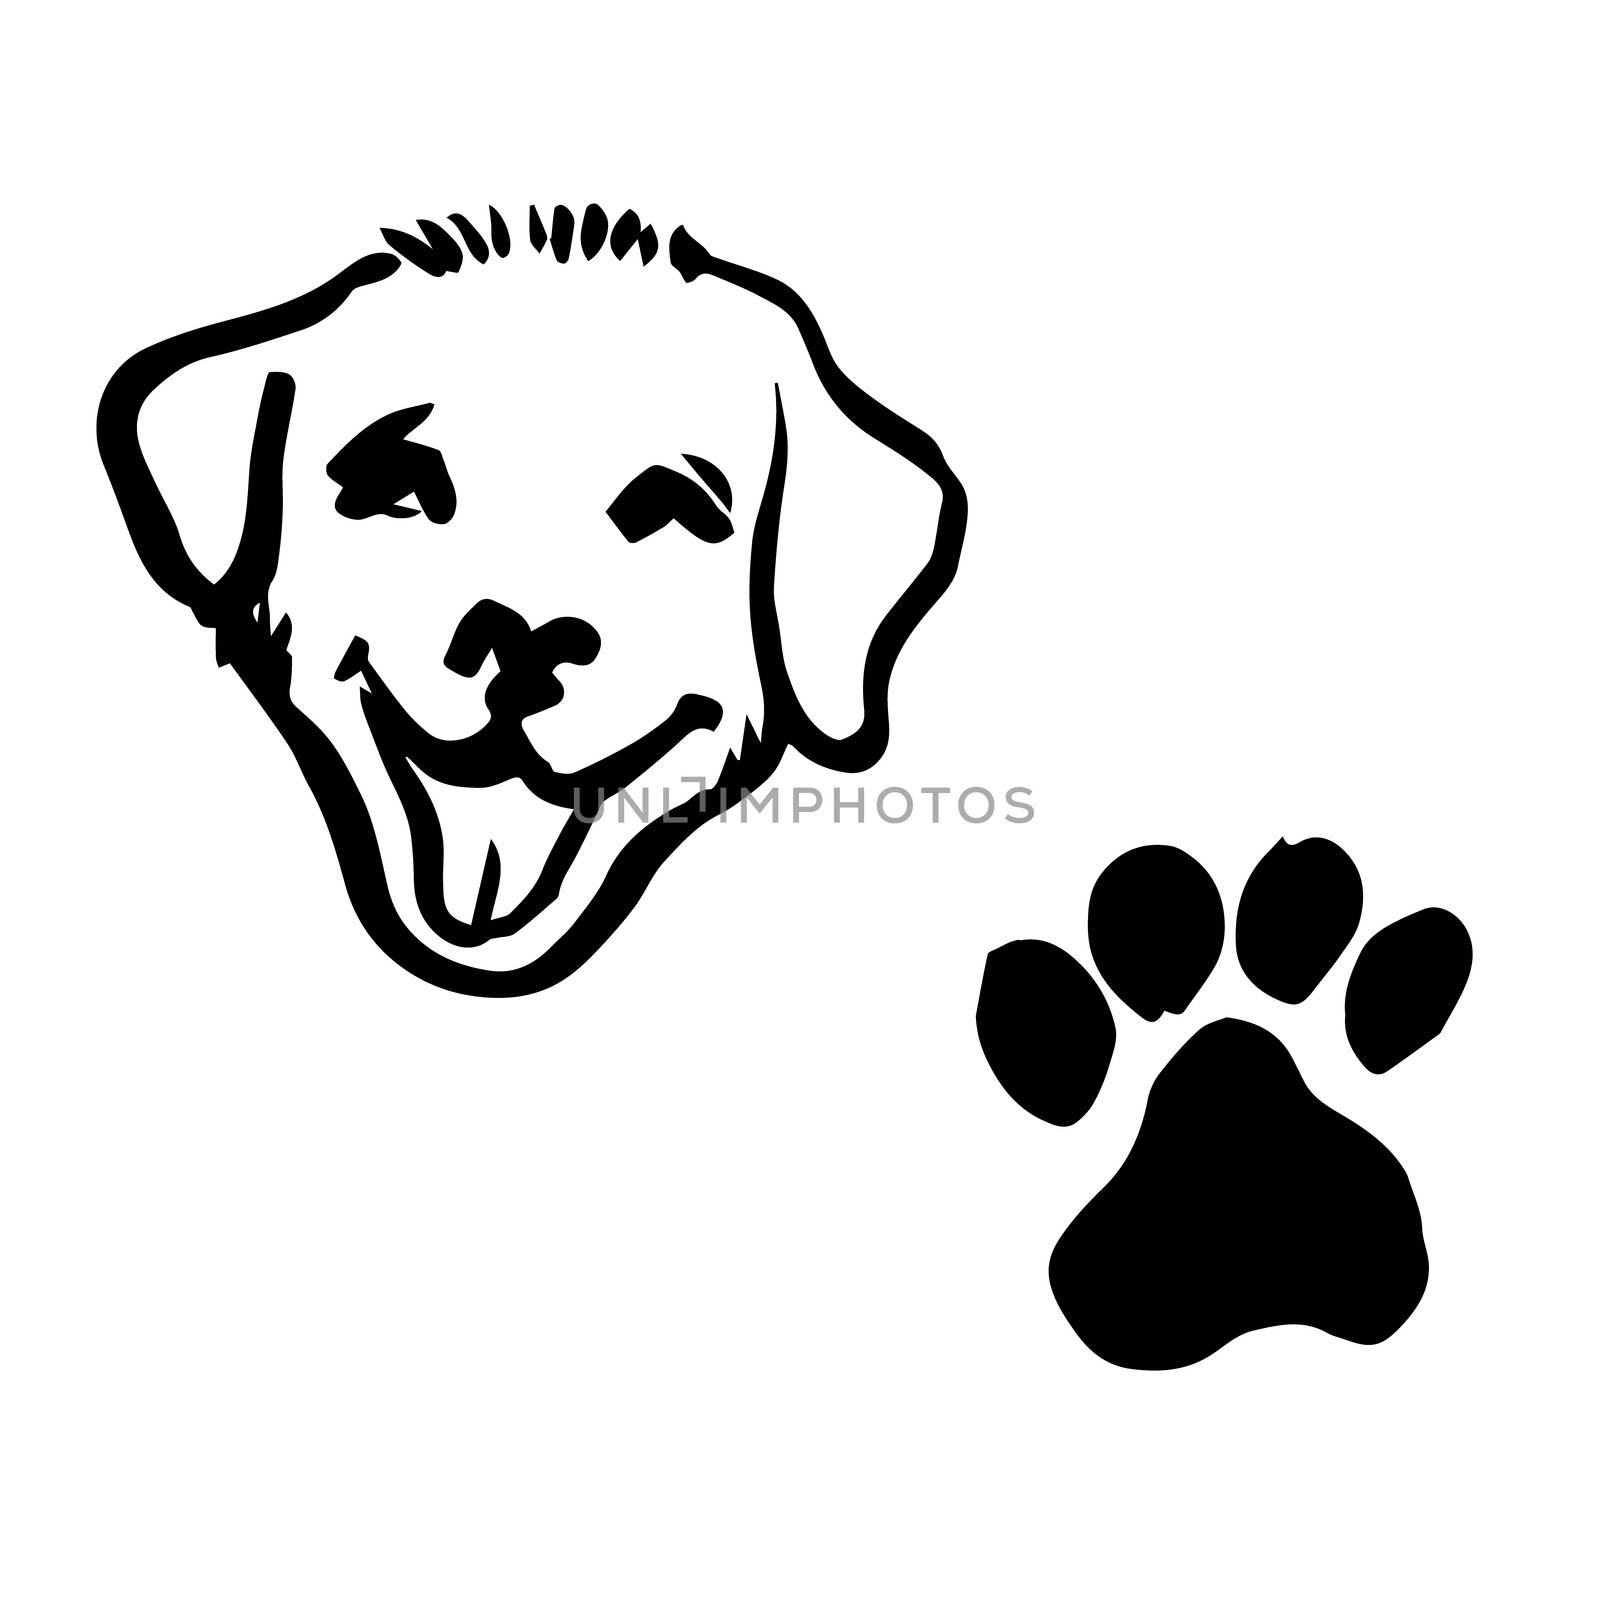 freehand sketch illustration of dog, animal footprint by simpleBE